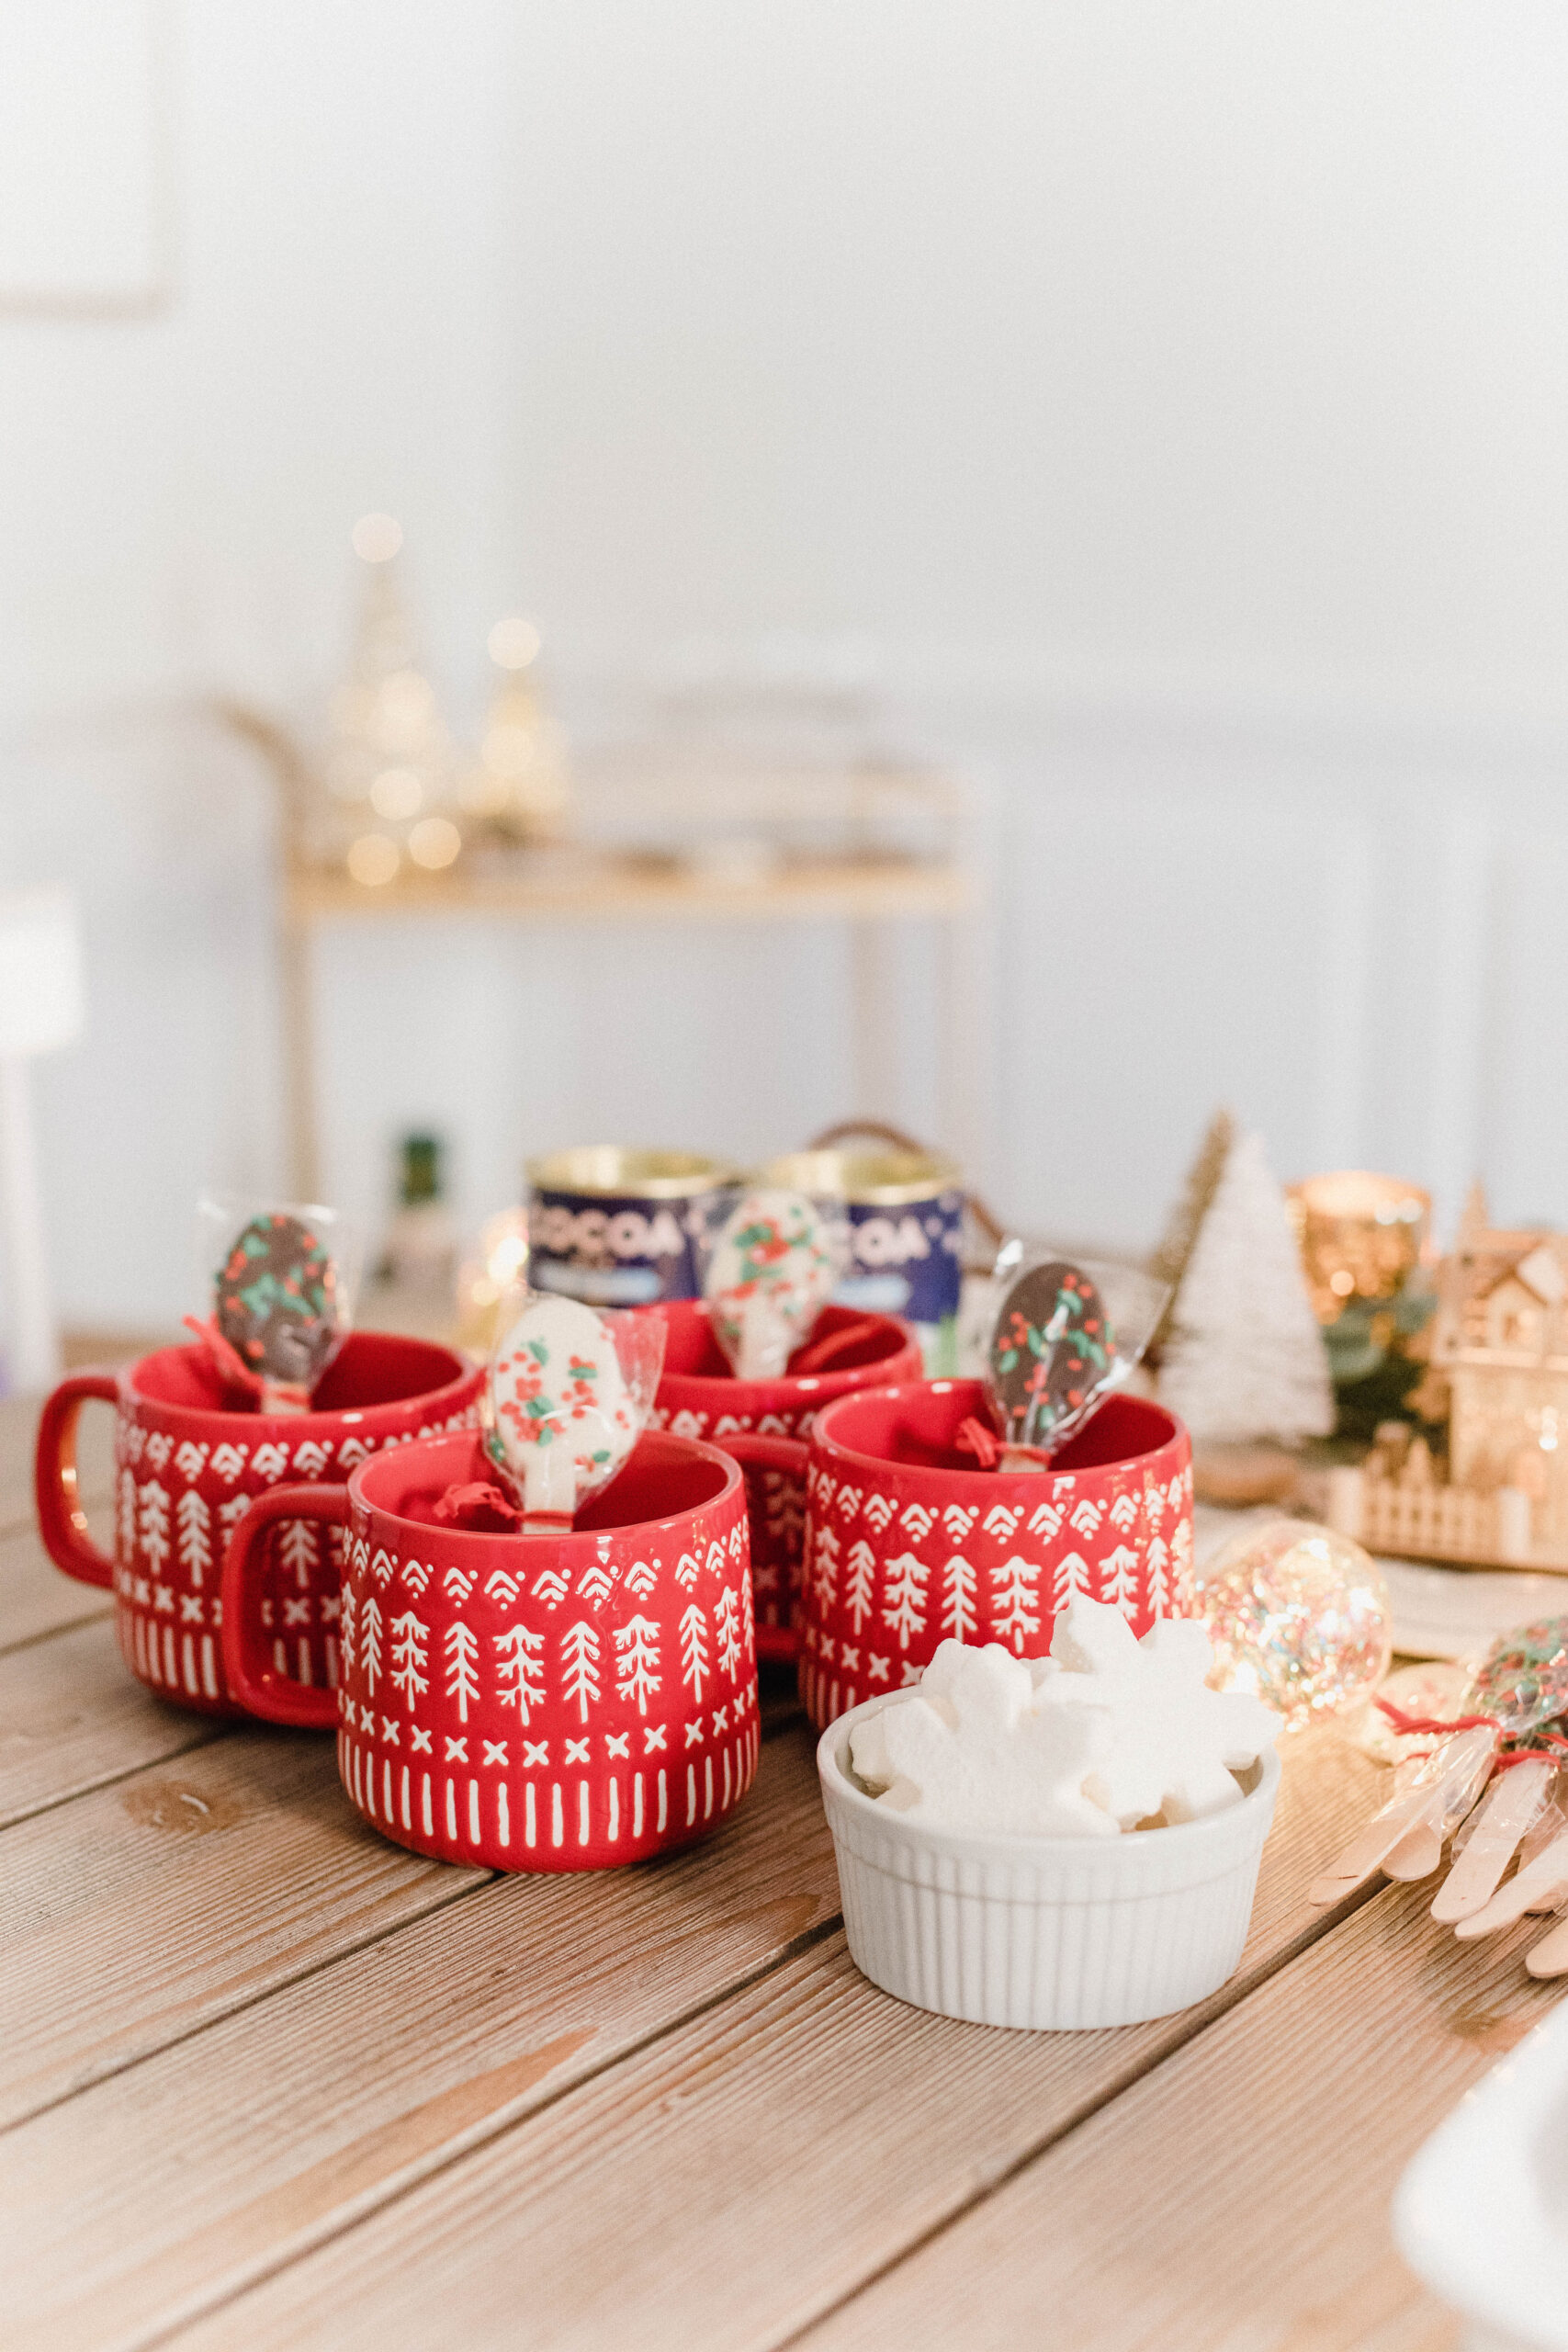 Looking for the perfect holiday hot cocoa bar? Connecticut Lifestyle blogger Lauren McBride is sharing her favorite finds for this festive holiday activity!